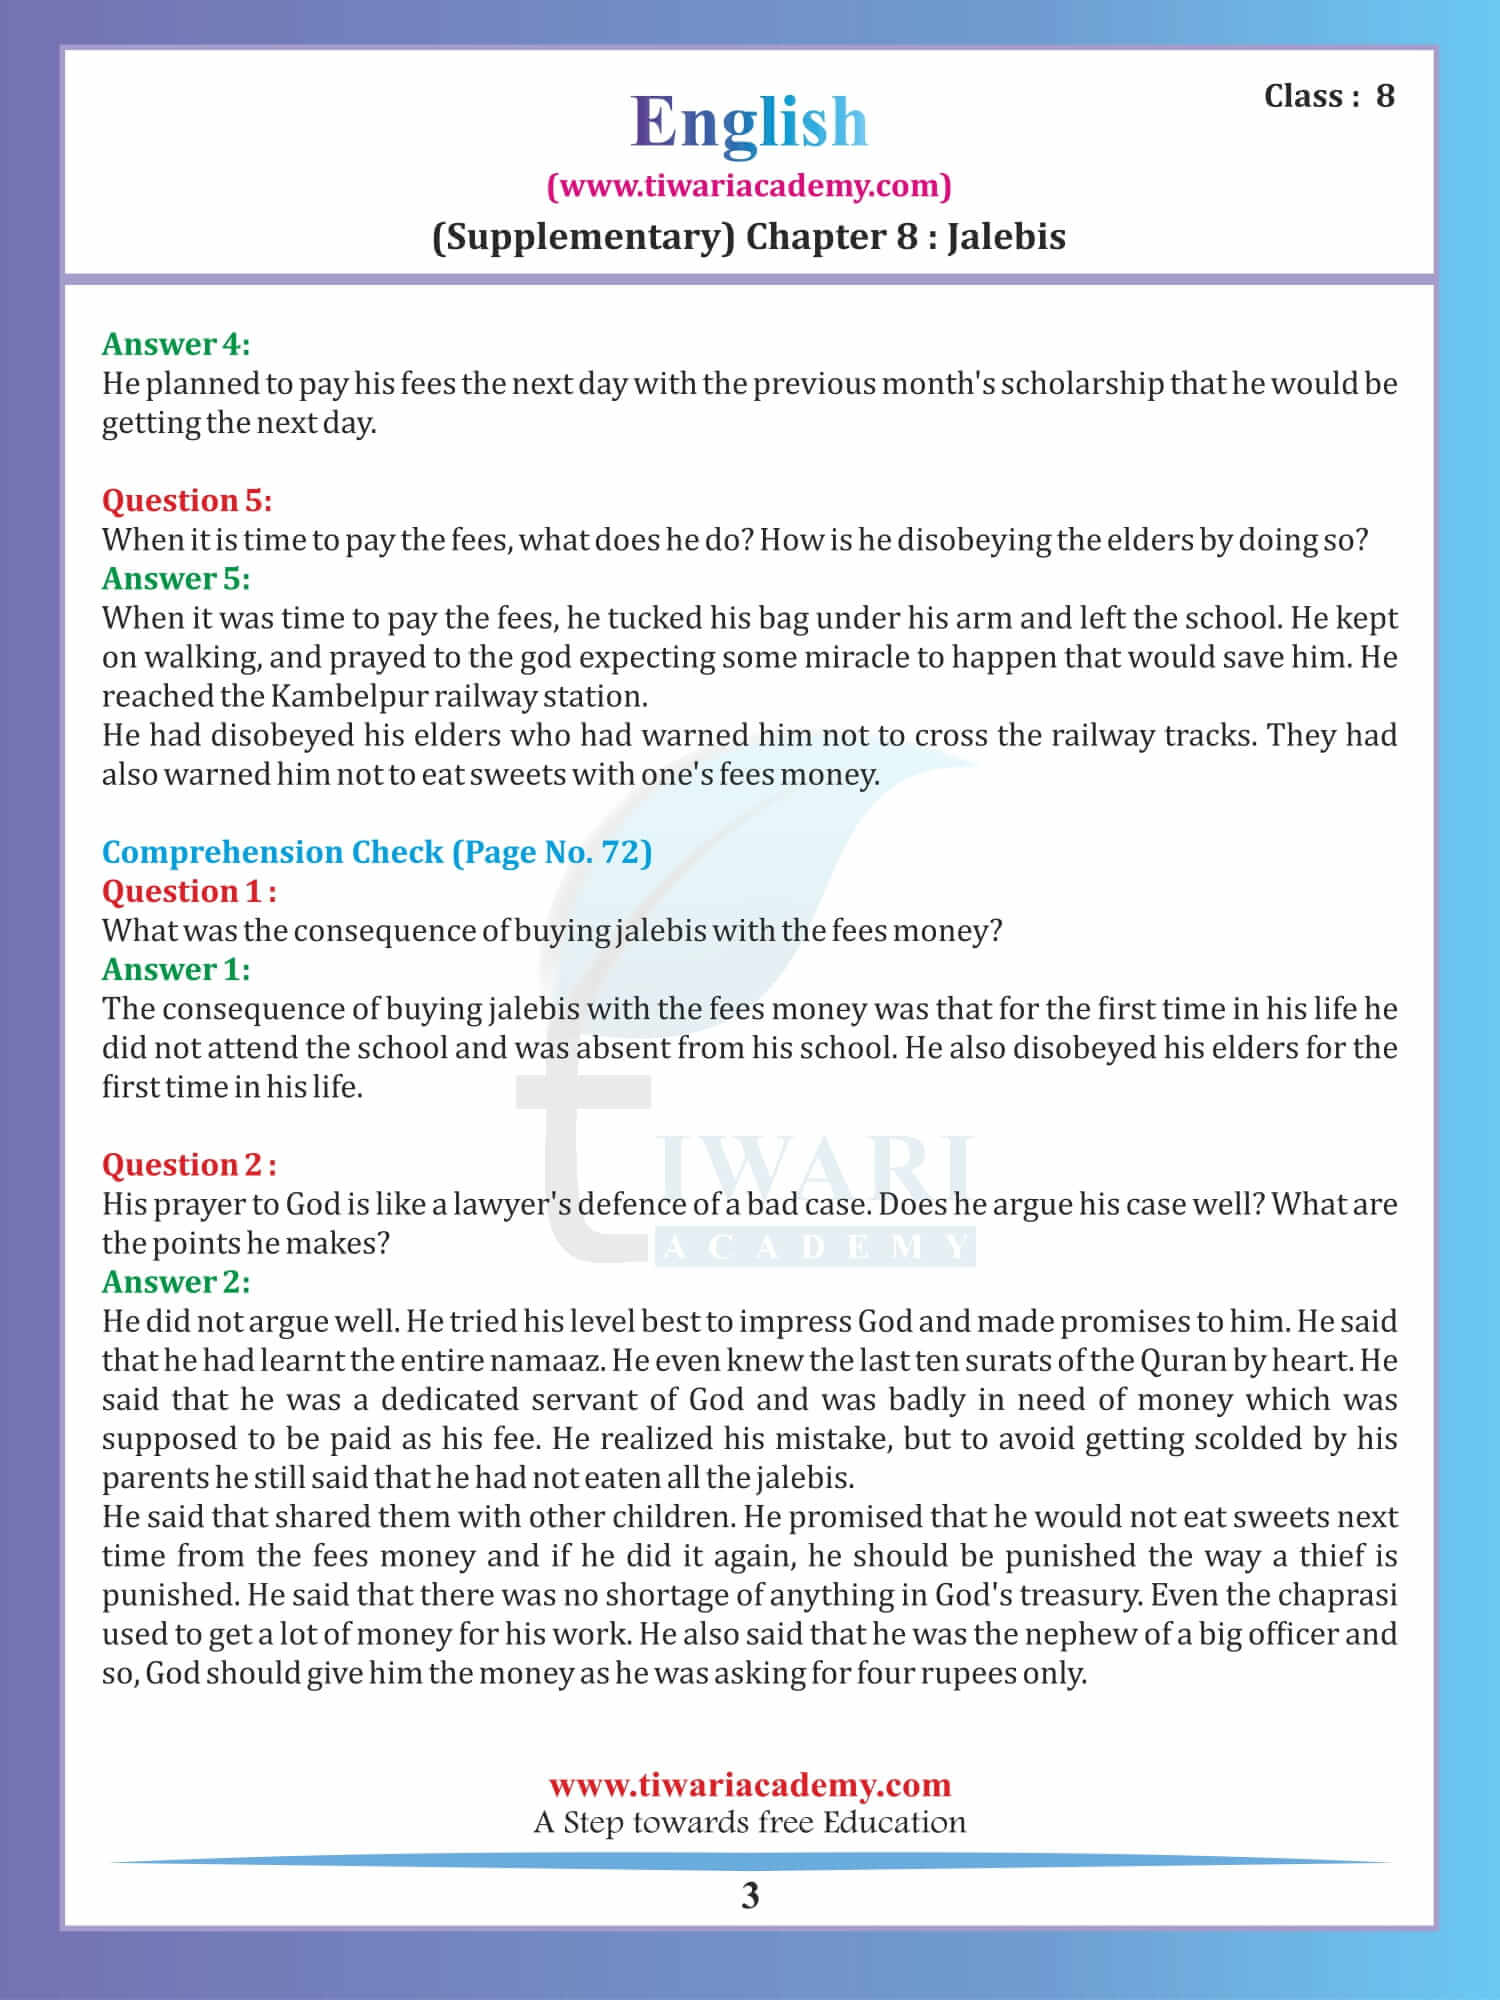 Class 8 English Supplementary Reader It So Happened Chapter 8